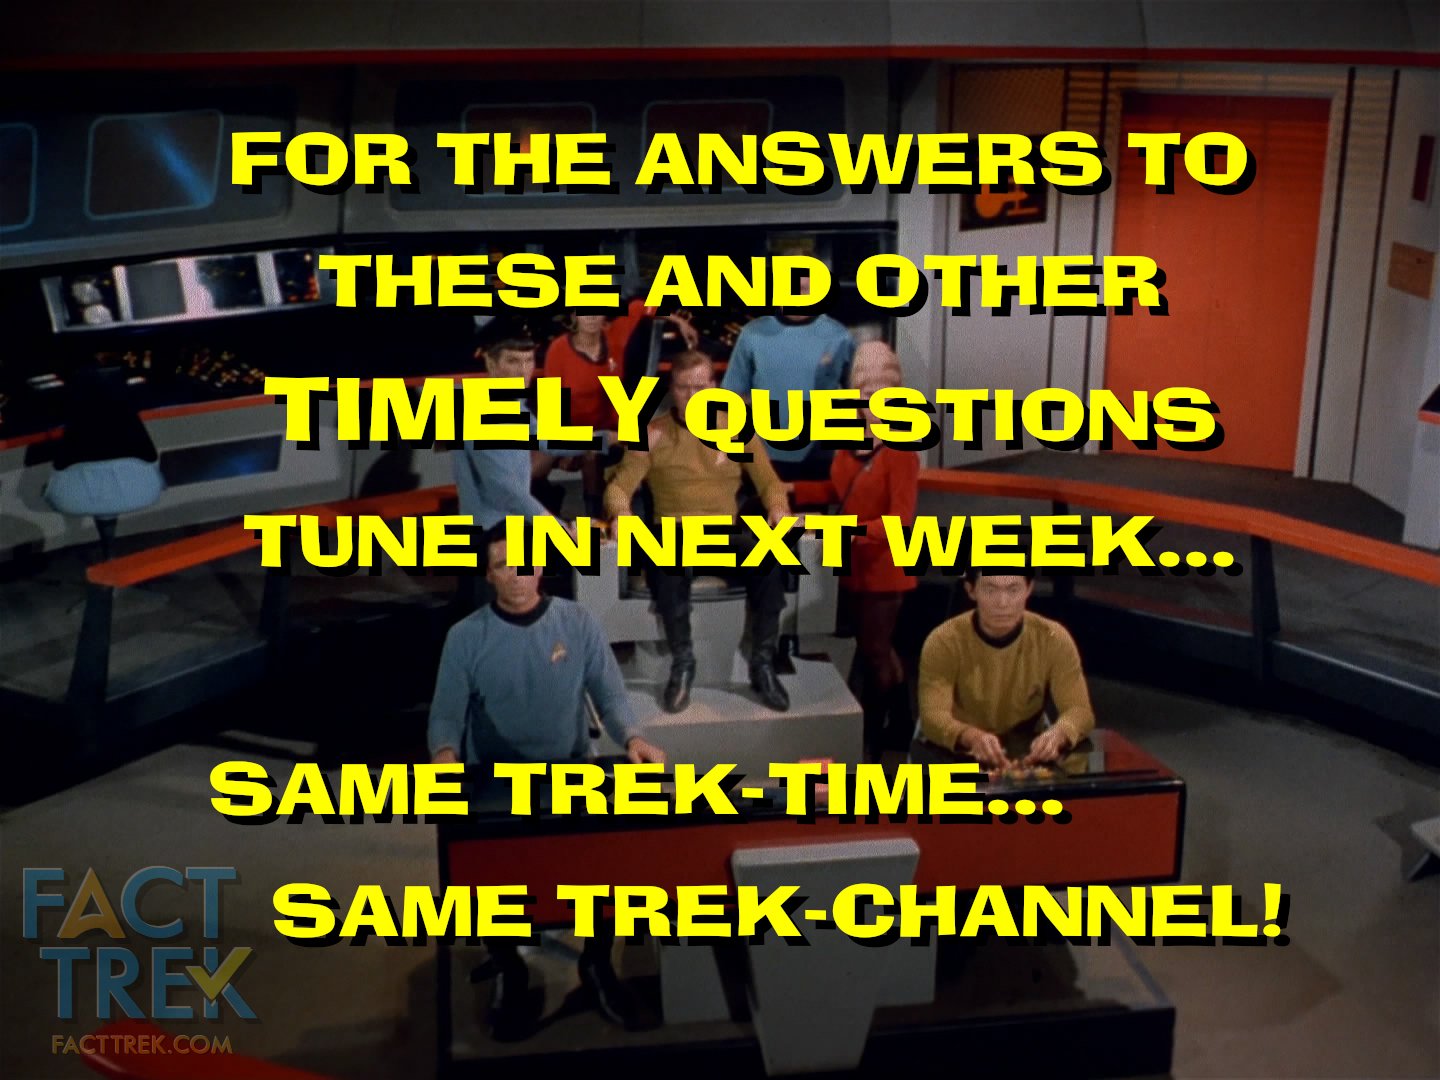  “For the answers to these and other TIMELY questions tune in next week! Same Trek-time… Same Trek-channel!” 